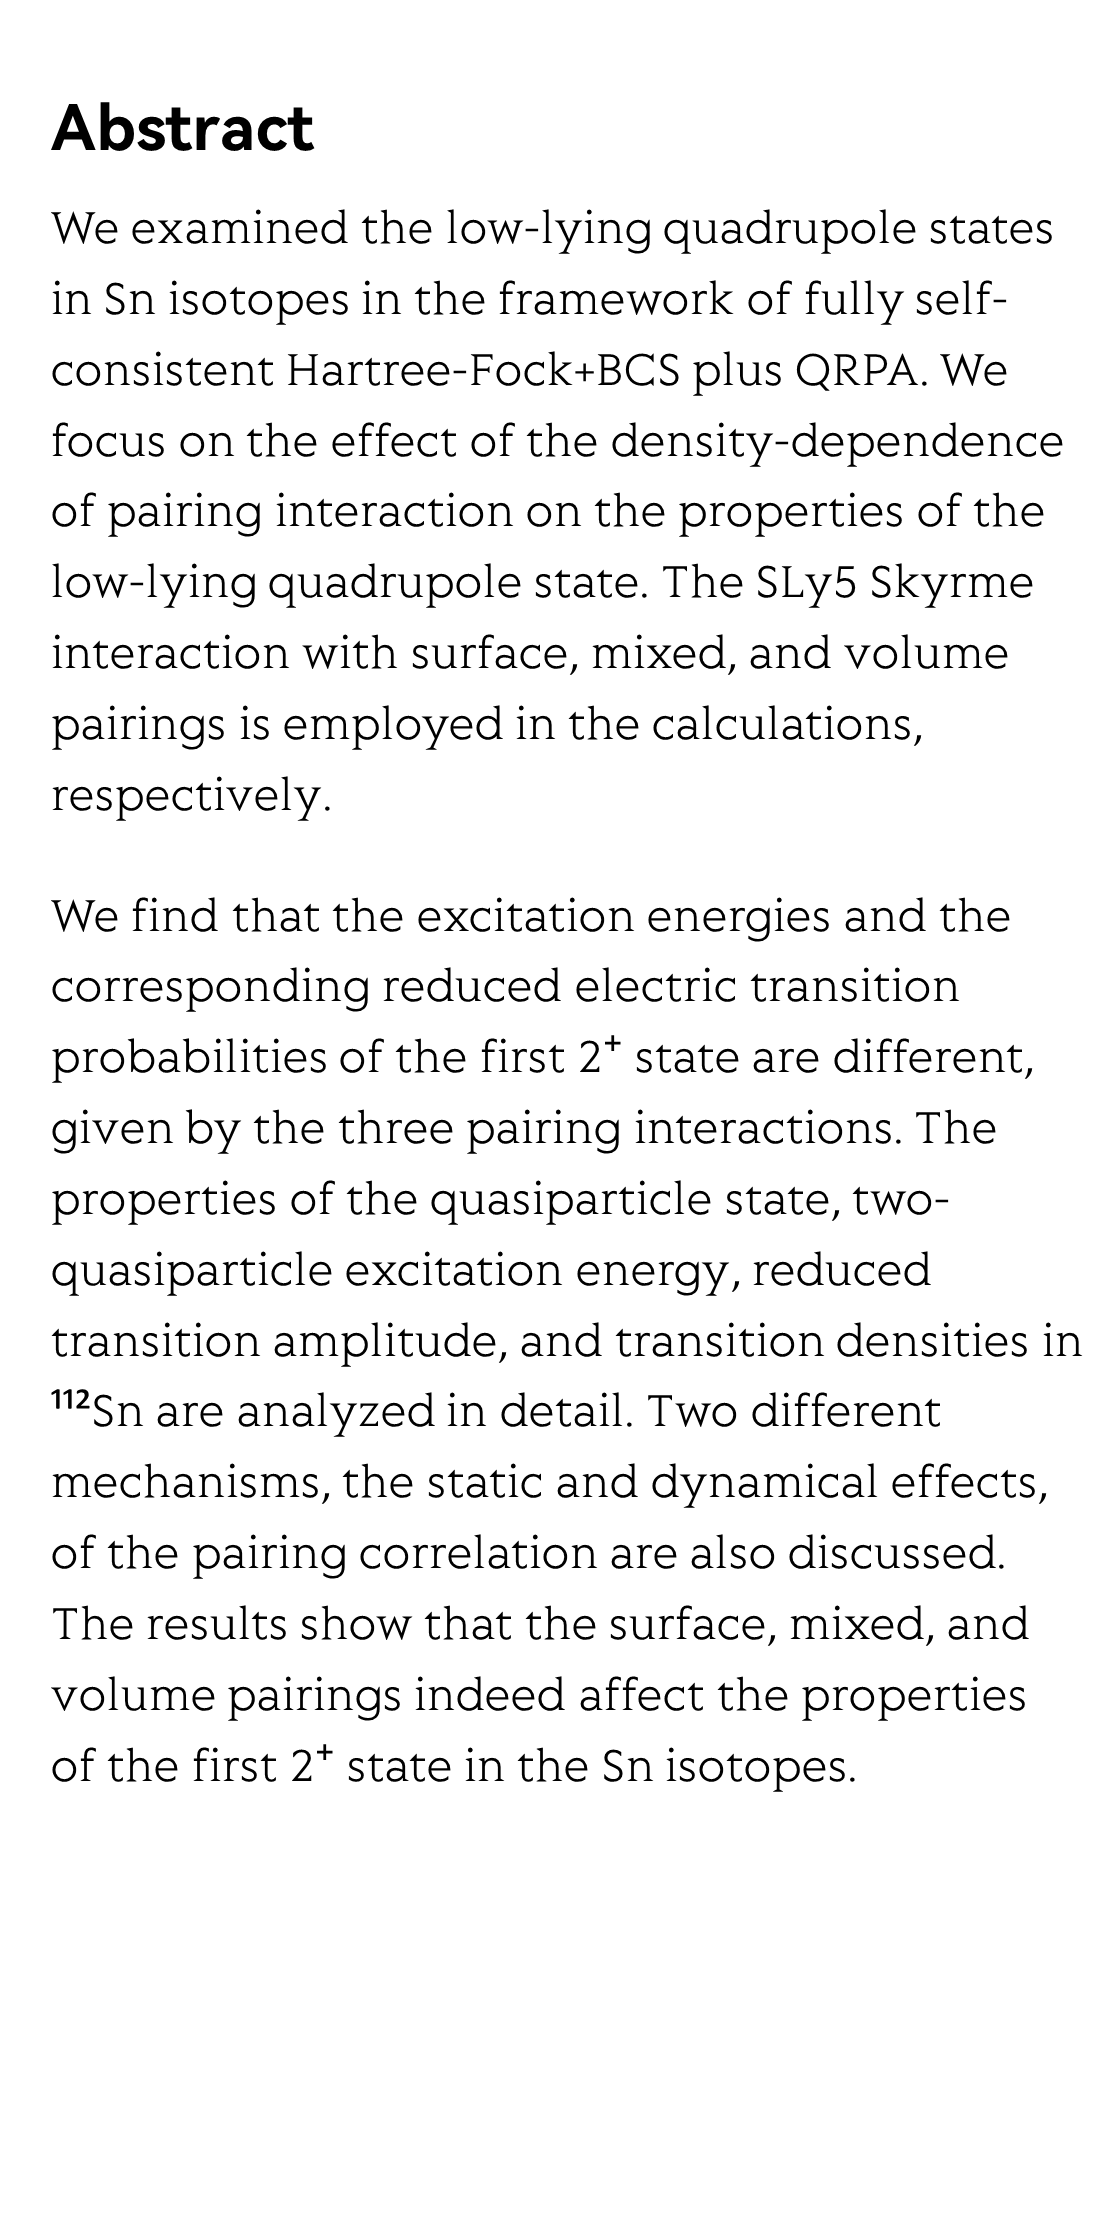 Effect of pairing correlation on low-lying quadrupole states in Sn isotopes_2